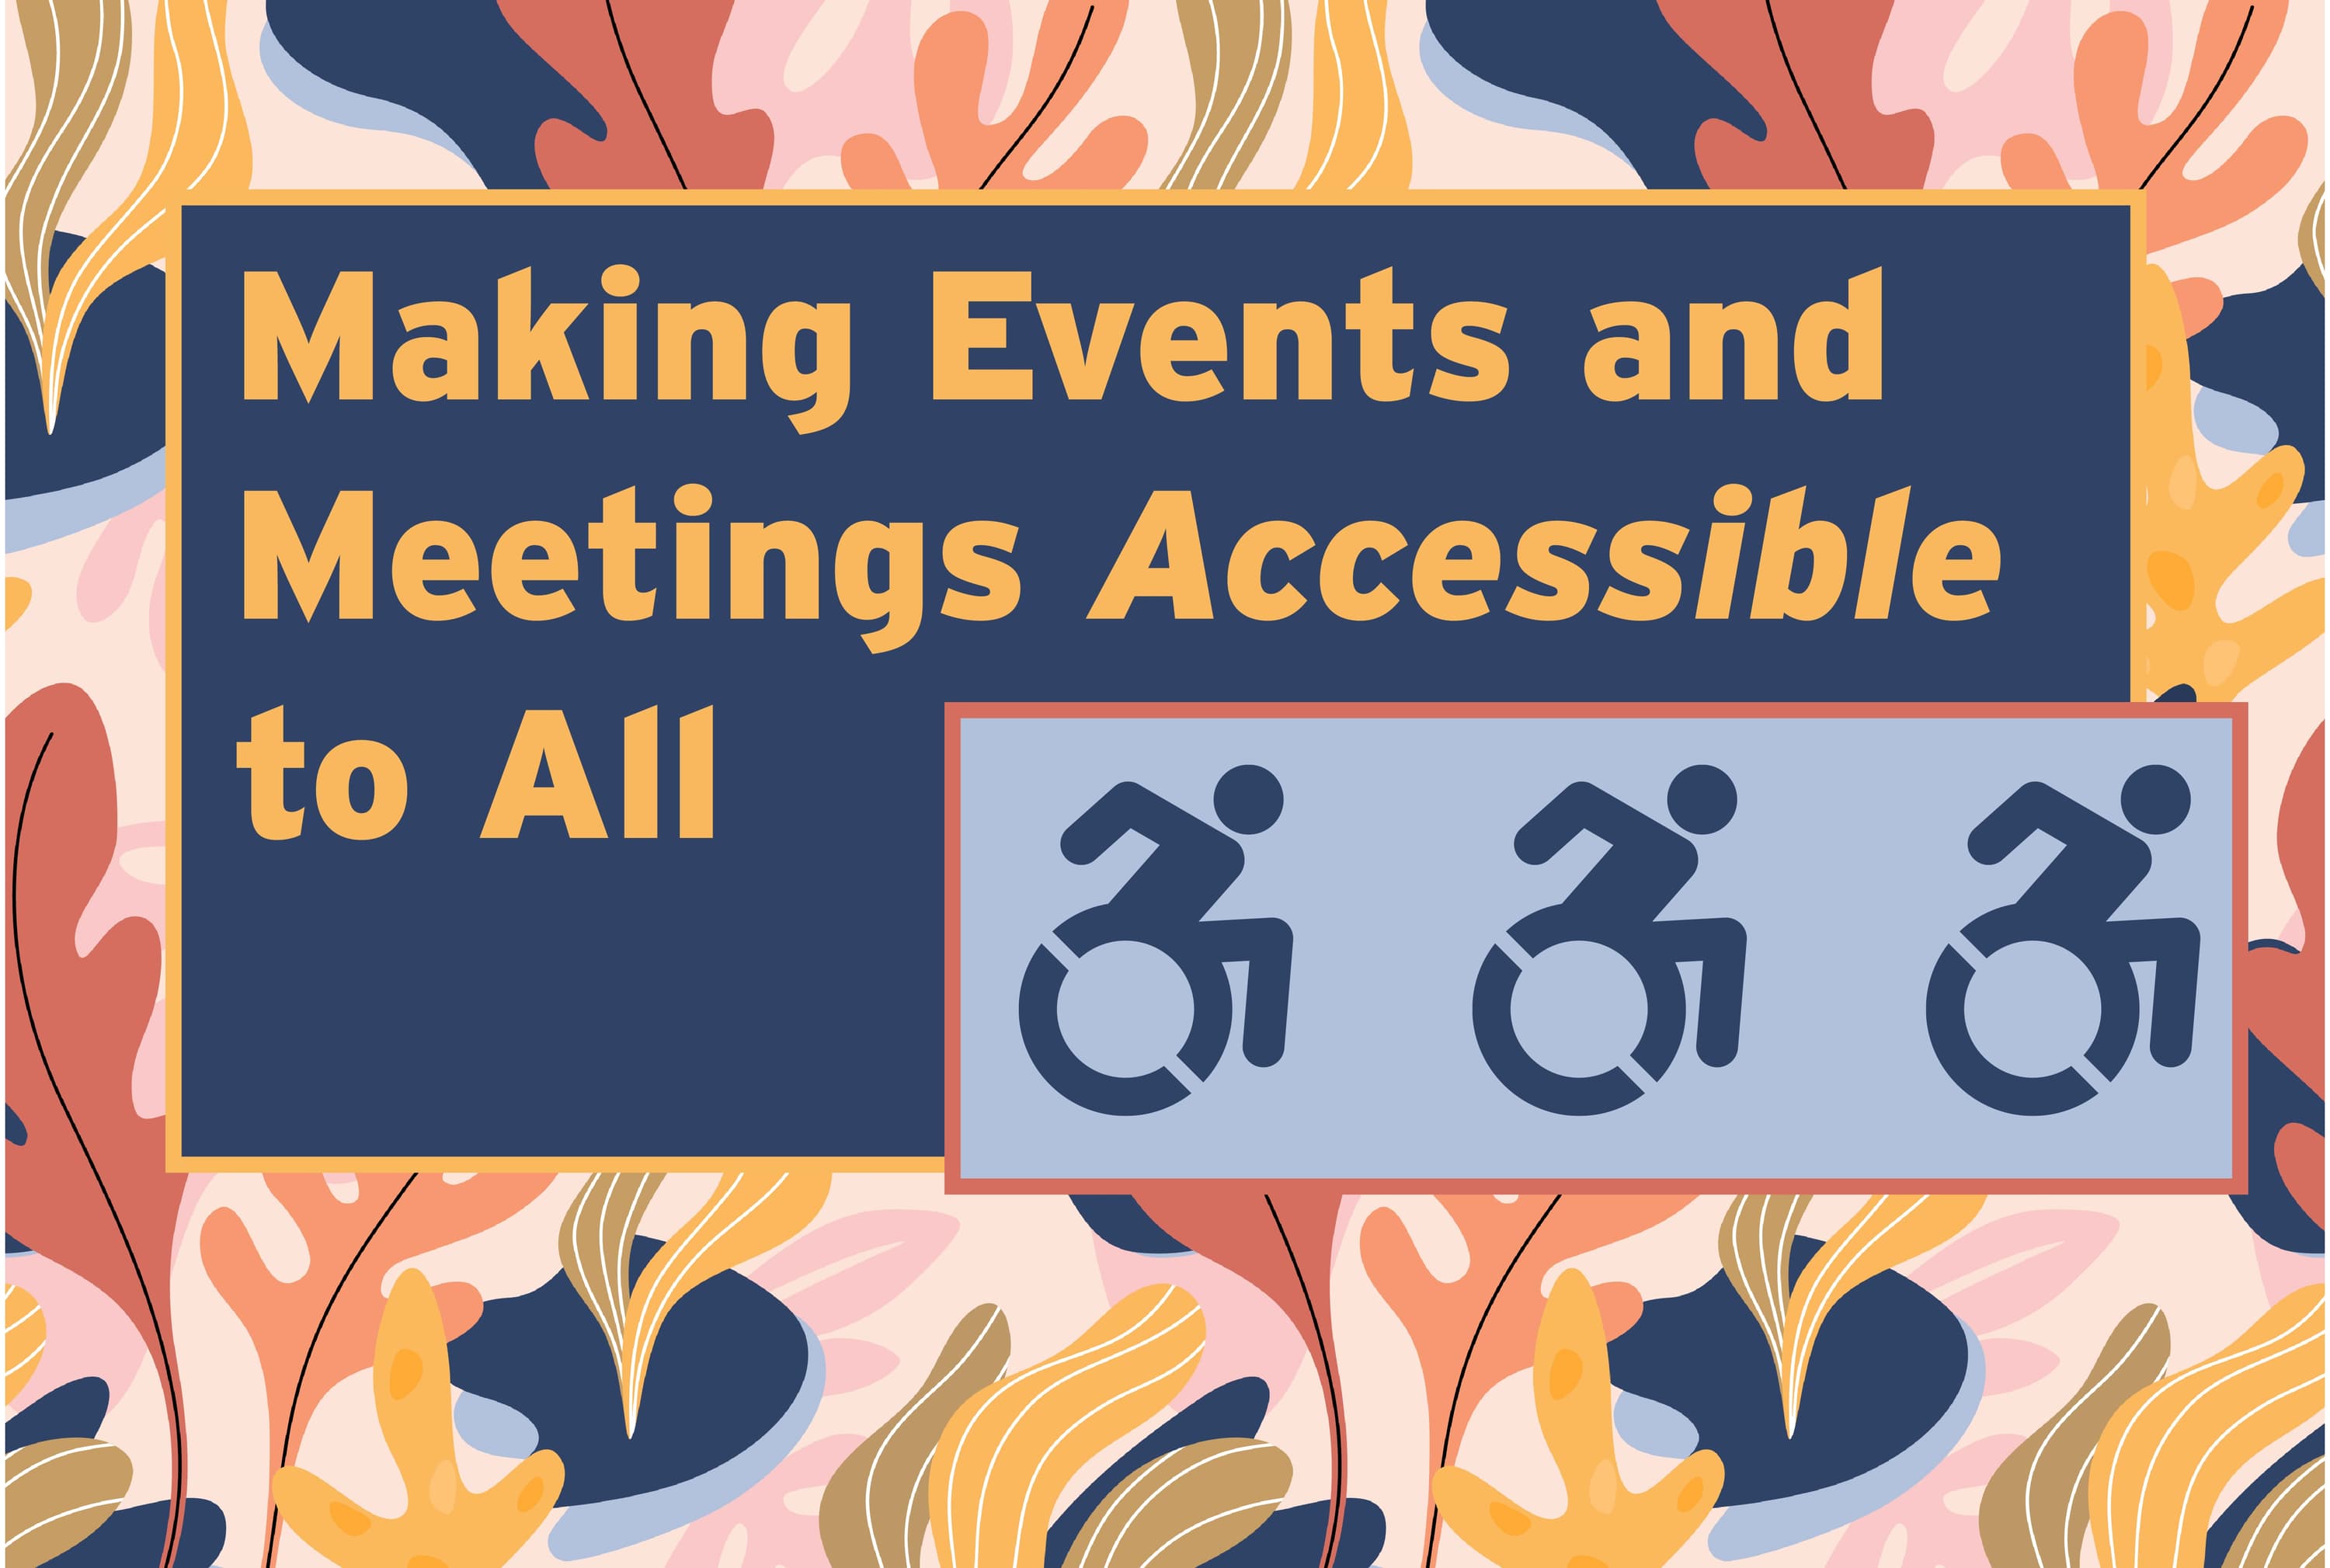 Event details repeated with a colorful leaf pattern in the background. There is also a logo of a person in a wheelchair.